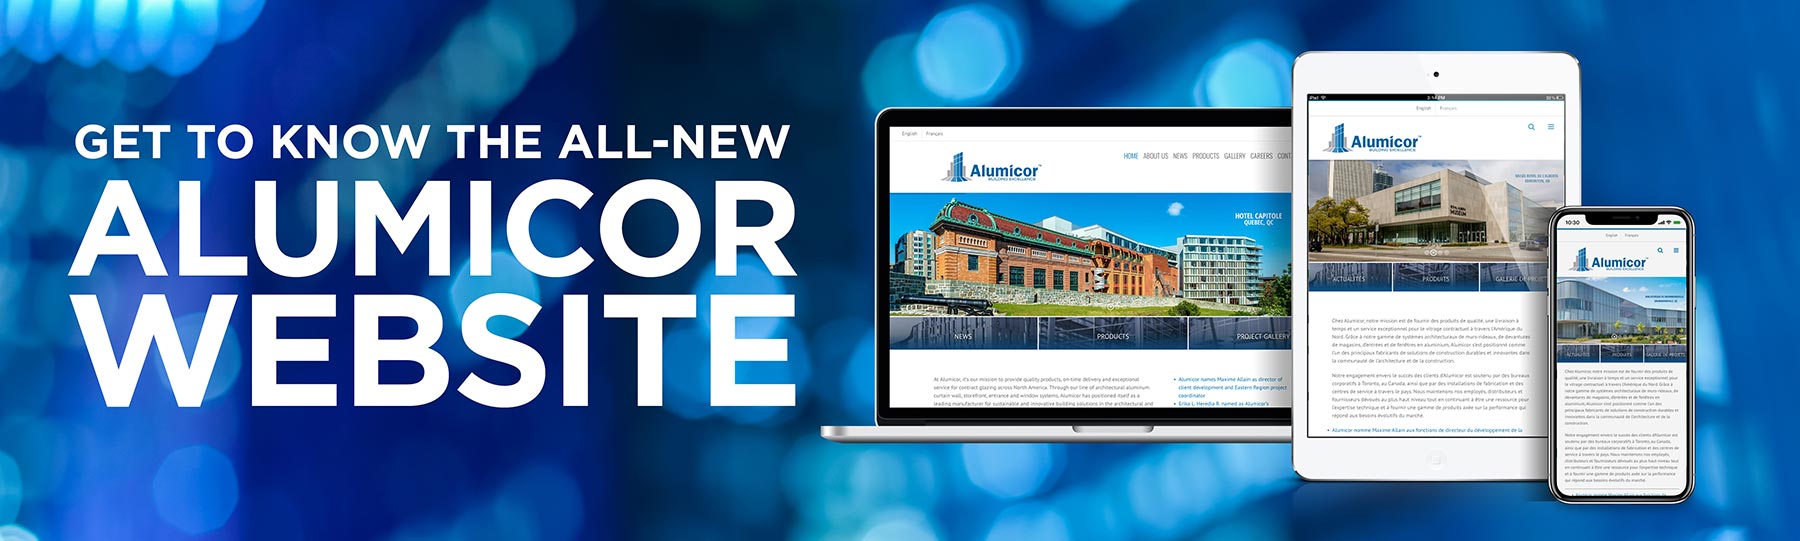 Get to Know the All New Alumicor Website